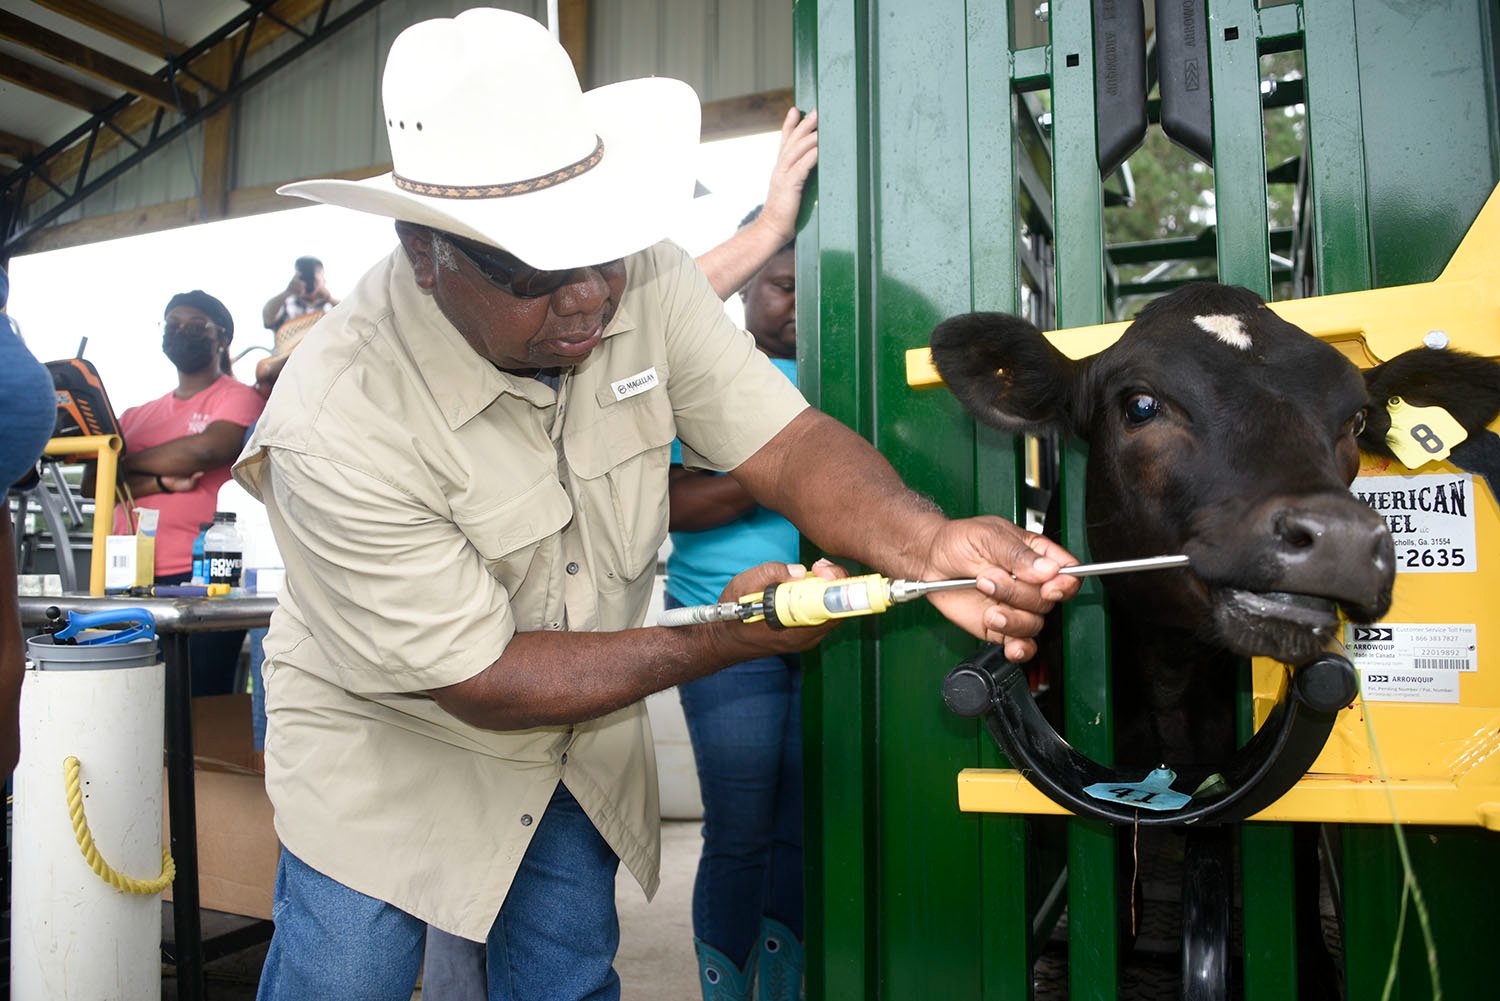 Amos Lawrence, a farmer from Taylor County, deworms a cow during a demonstration at the Beef Quality Assurance (BQA) Certification Training in Cobbtown, Georgia June 19.